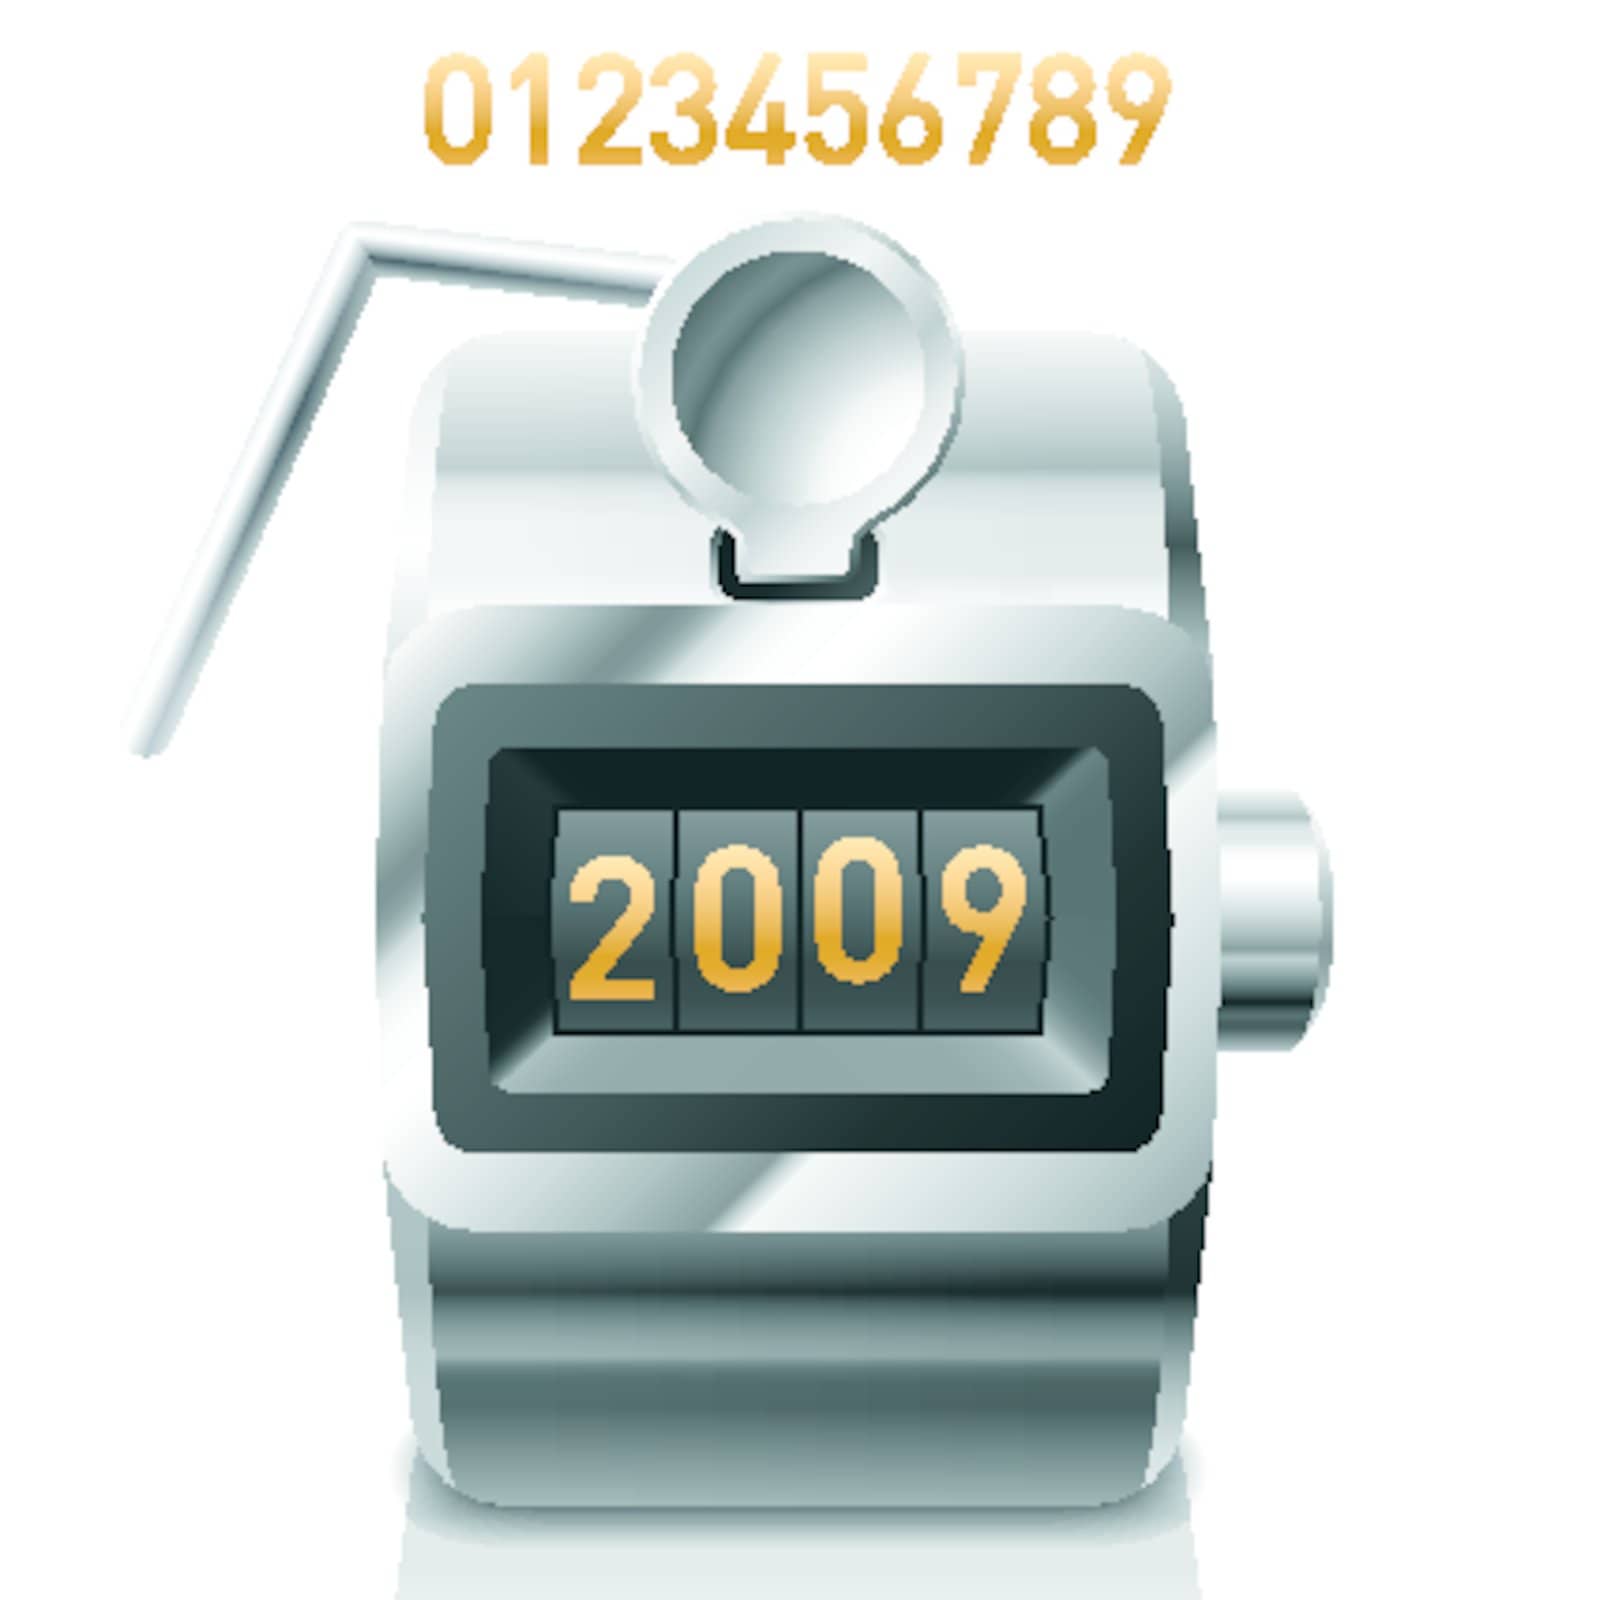 Vector illustration of hand tally counter